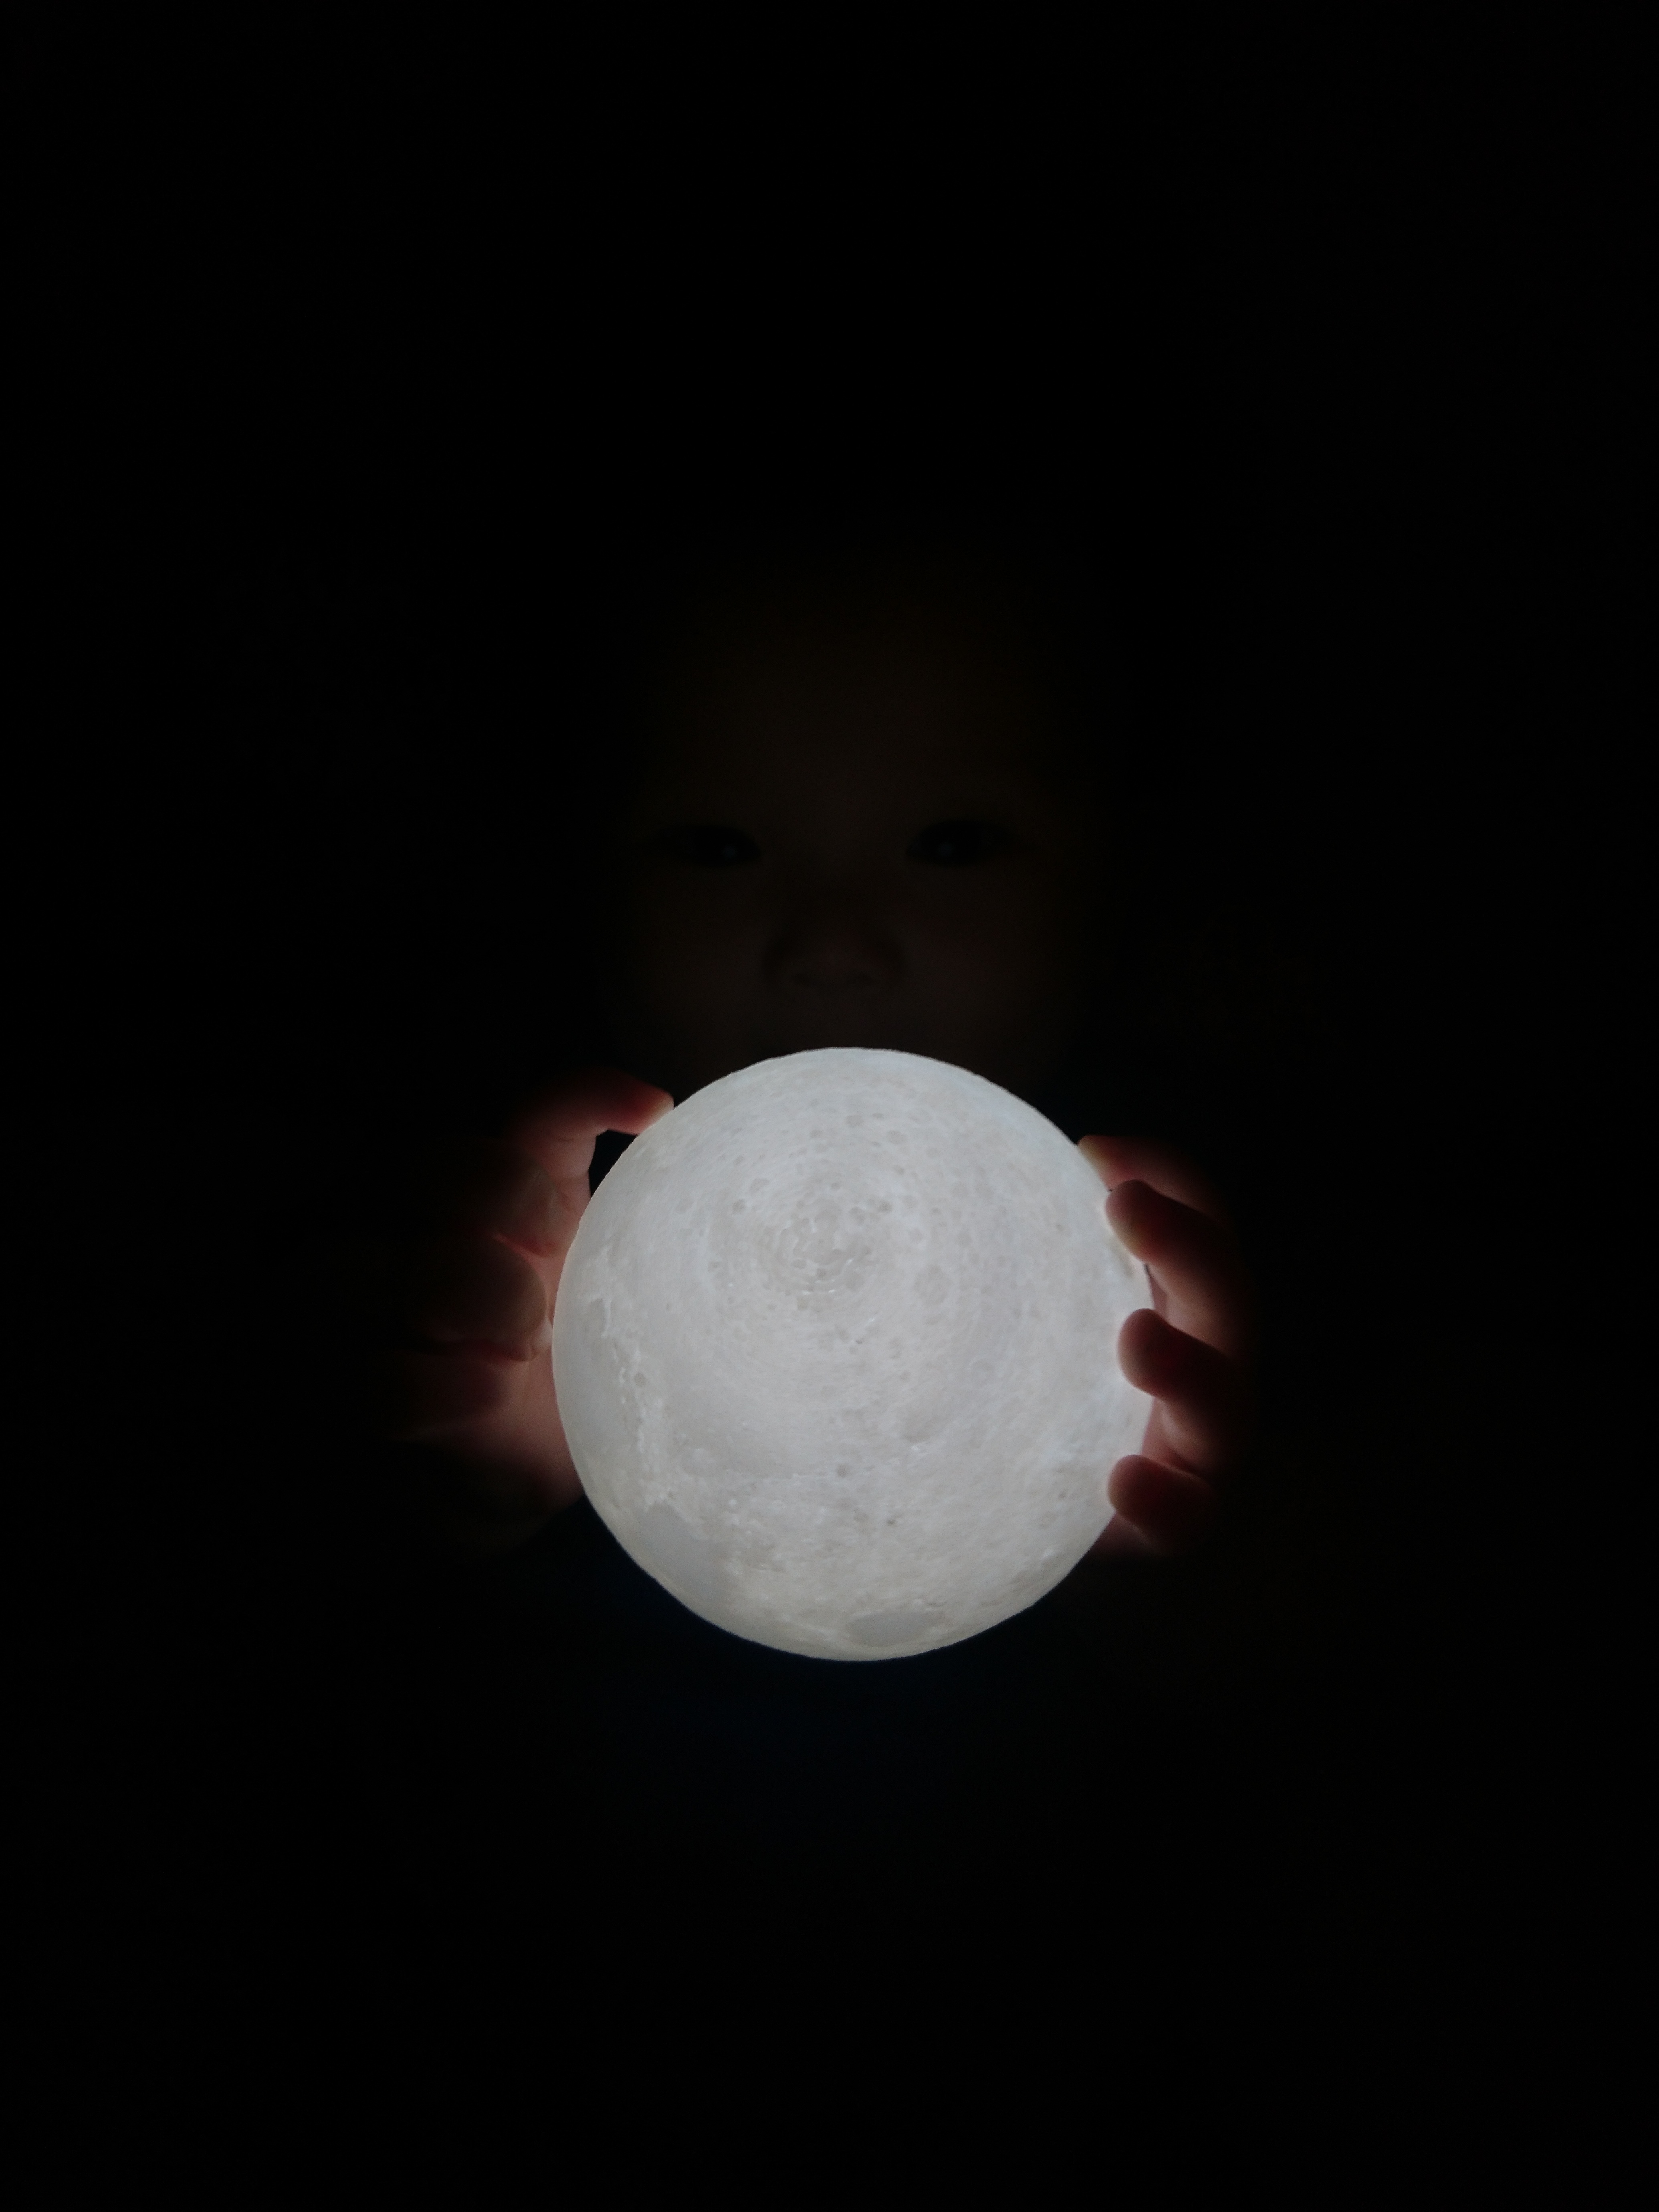 51992 Screensavers and Wallpapers Child for phone. Download dark, moon, hands, ball, glow, child pictures for free